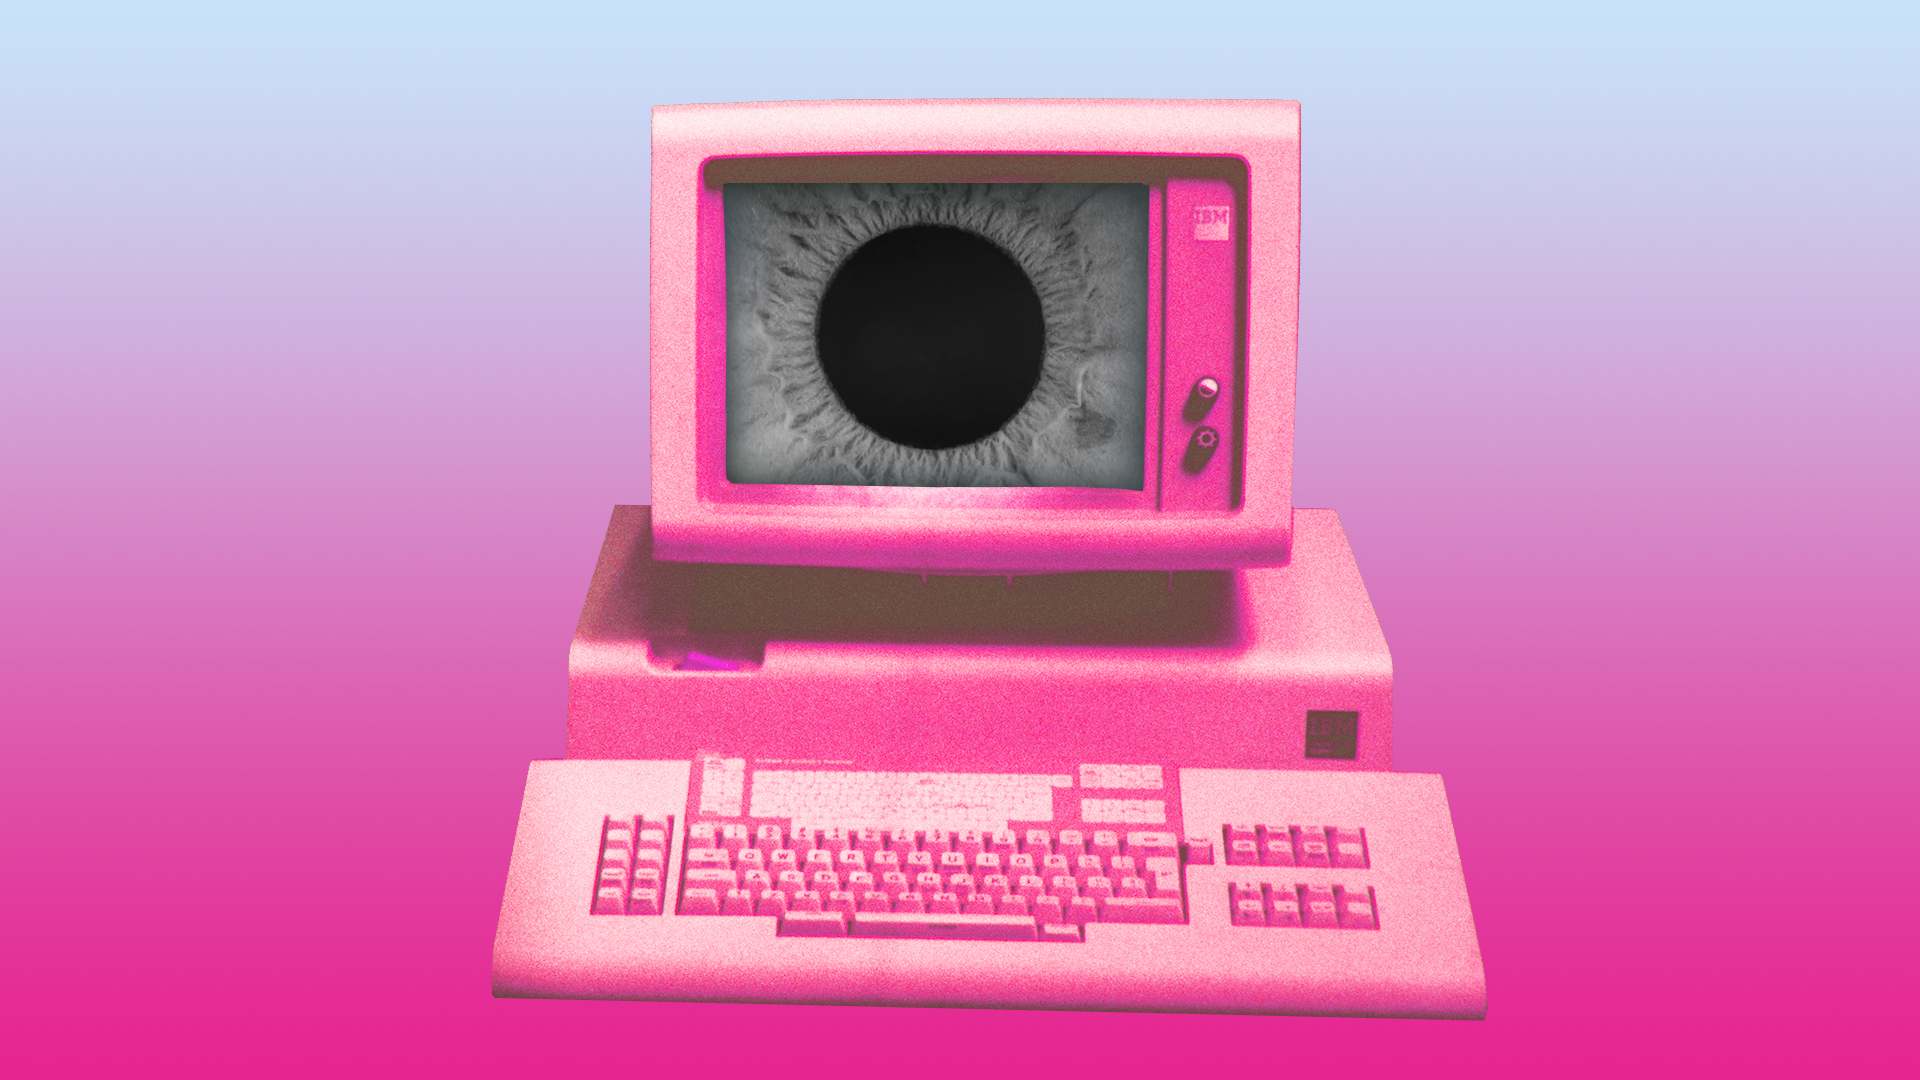 An old IBM PC turned pink and ominous eyes appeared on the screen.